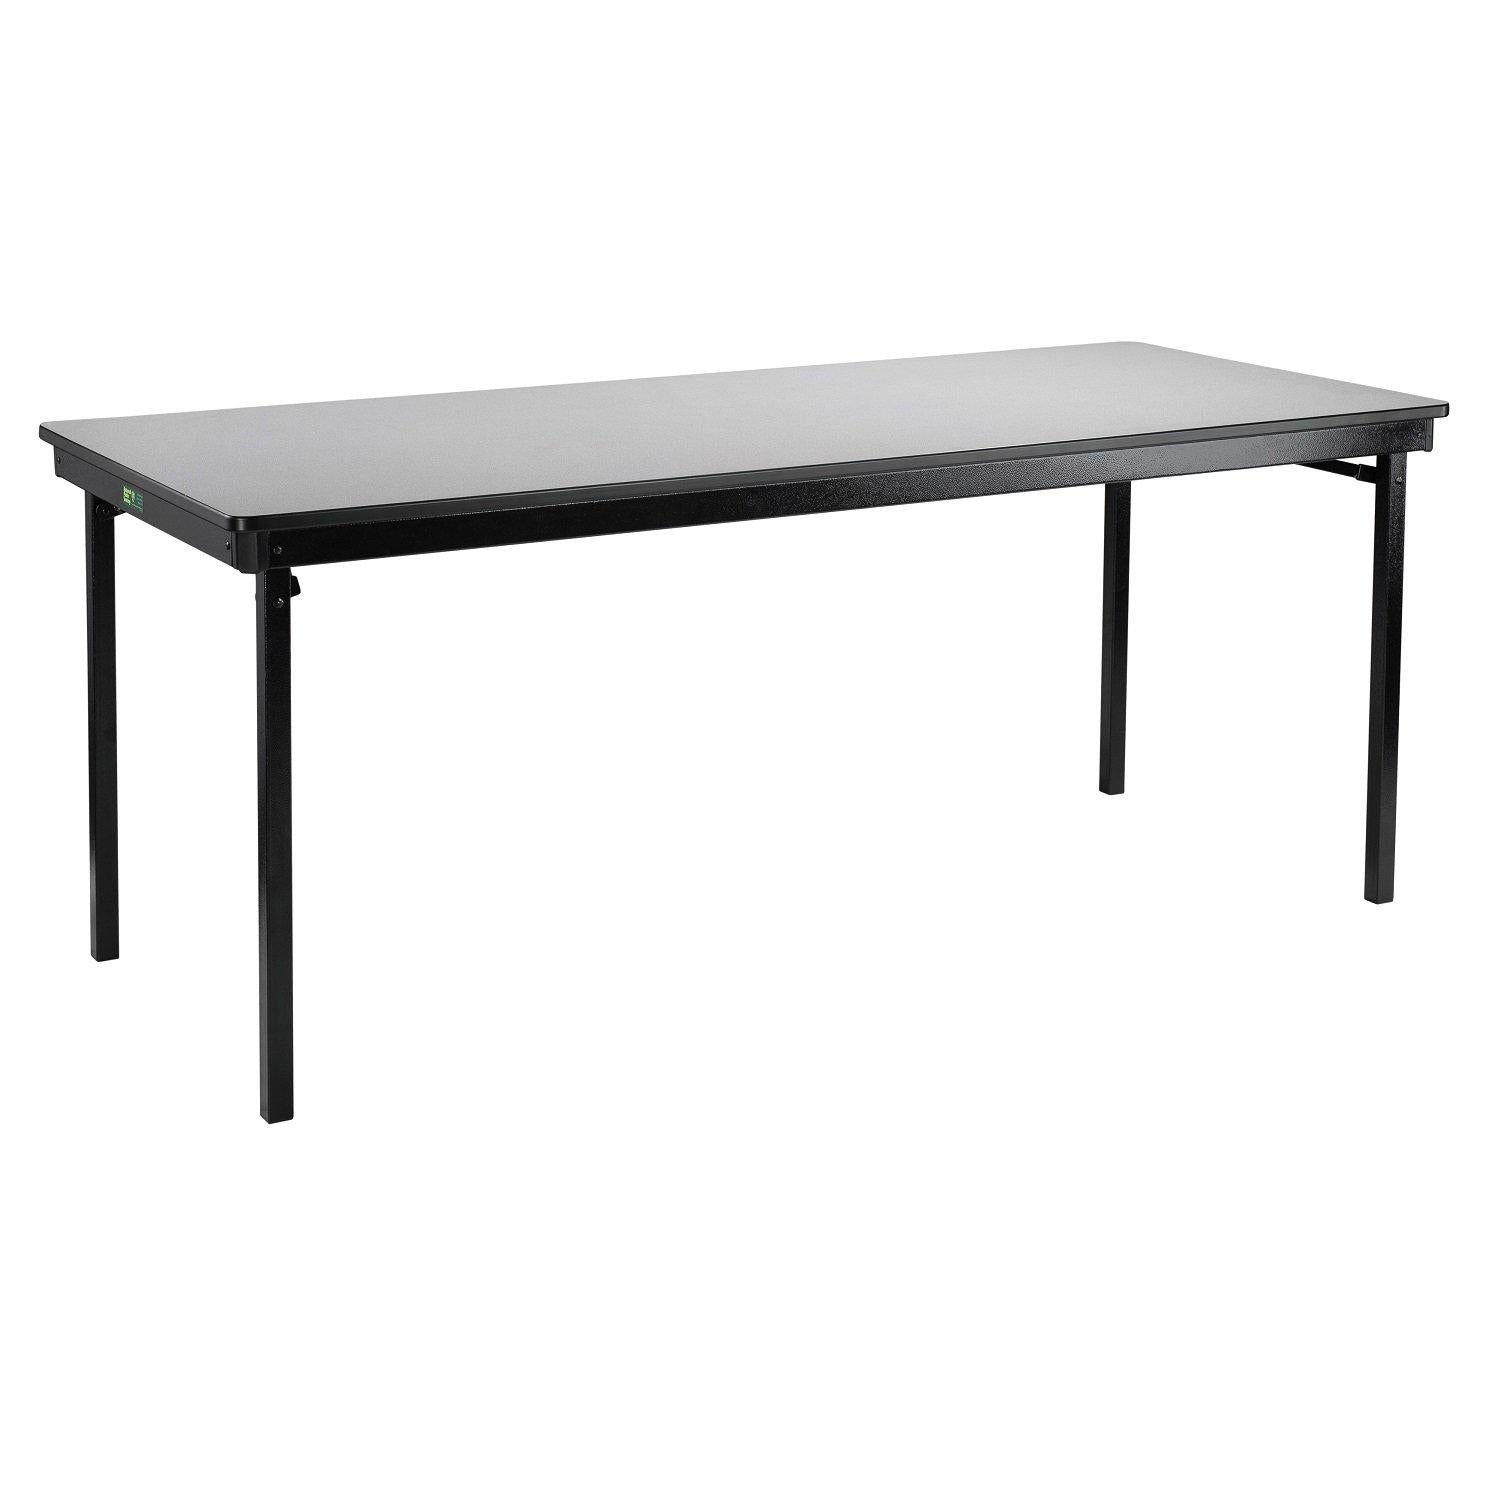 Max Seating Folding Table, 24" x 96", Premium Plywood Core, High Pressure Laminate Top with PVC Edge Banding